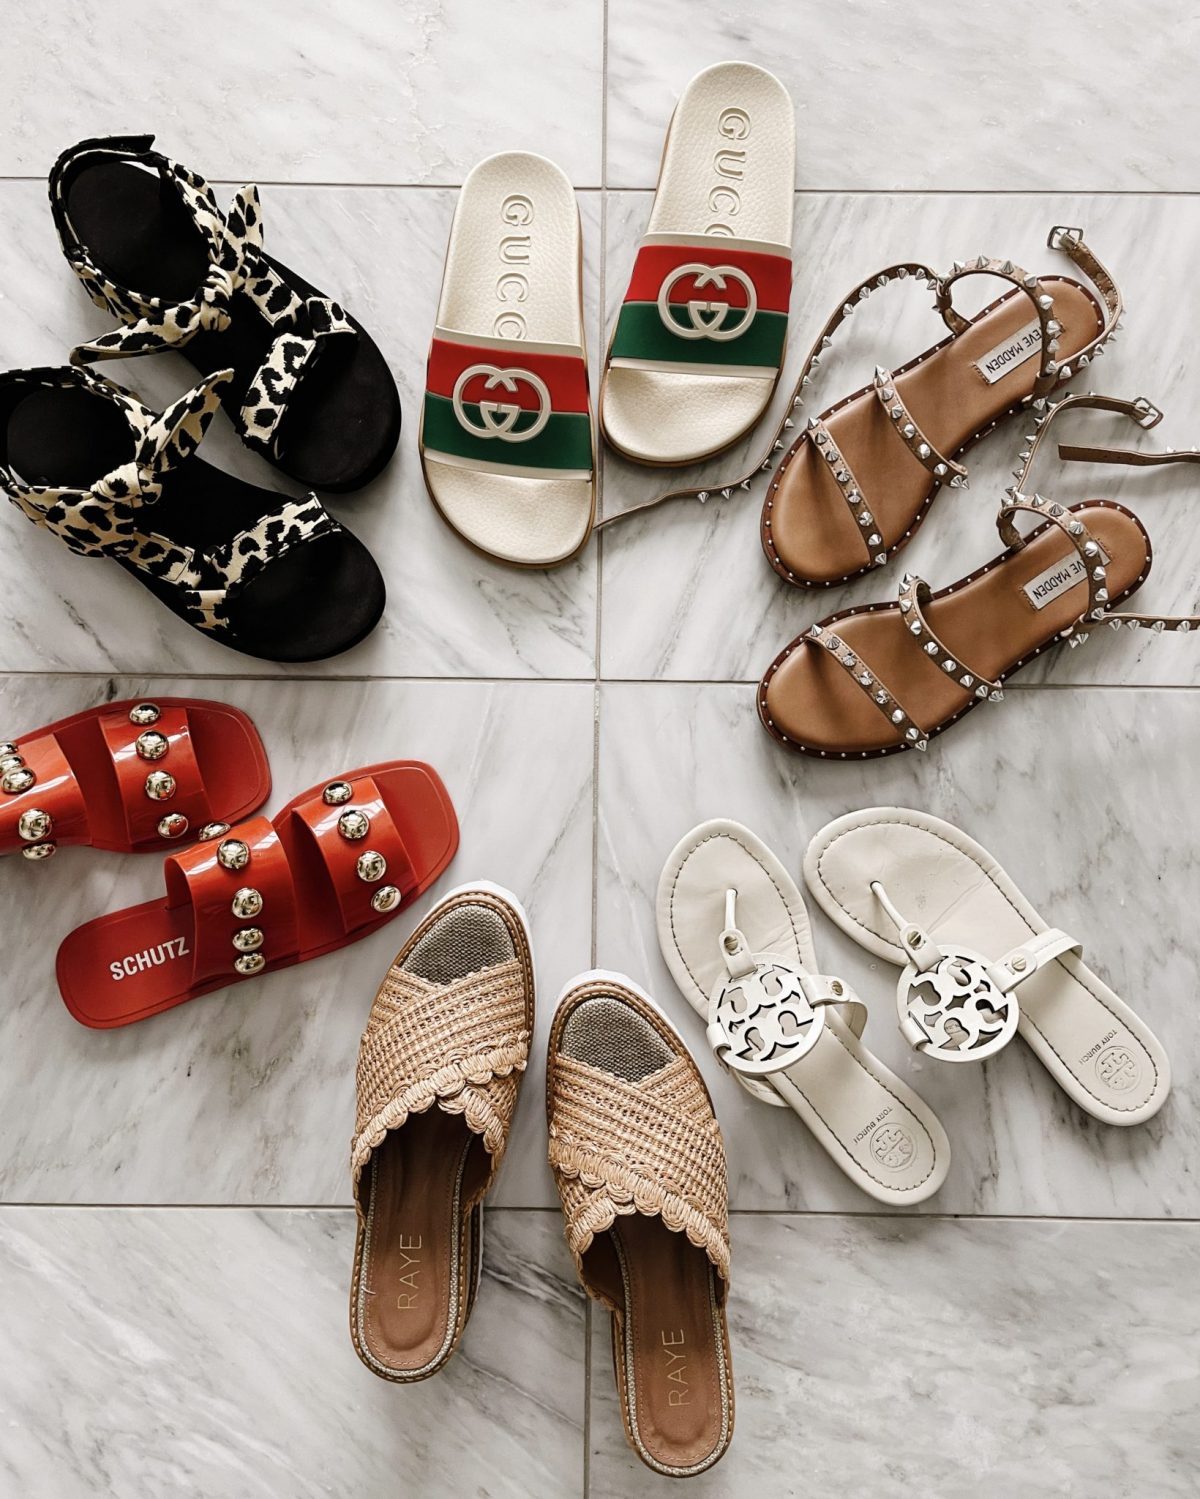 Six pairs of sandals arranged in a circle